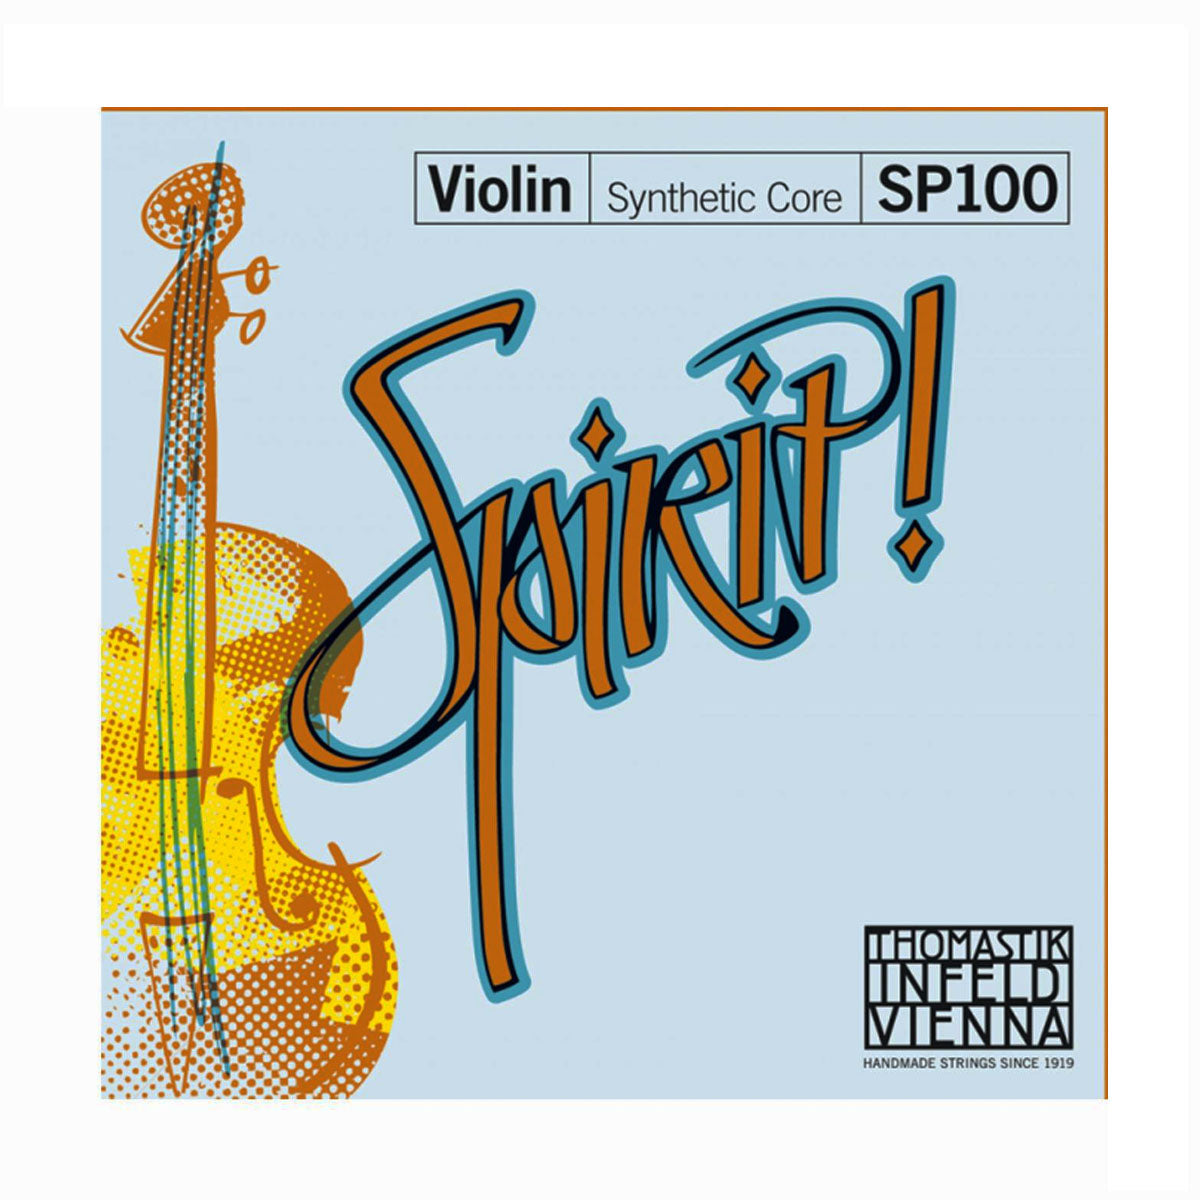 Spirit! Violin Strings, Thomastik Infeld, Austria, full size, 4/4, 3/4, 1/2, 1/4, 1/8, 1/16, hand-picked and inspected by Violins and such, with TEO musical Instruments, London Ontario Canada